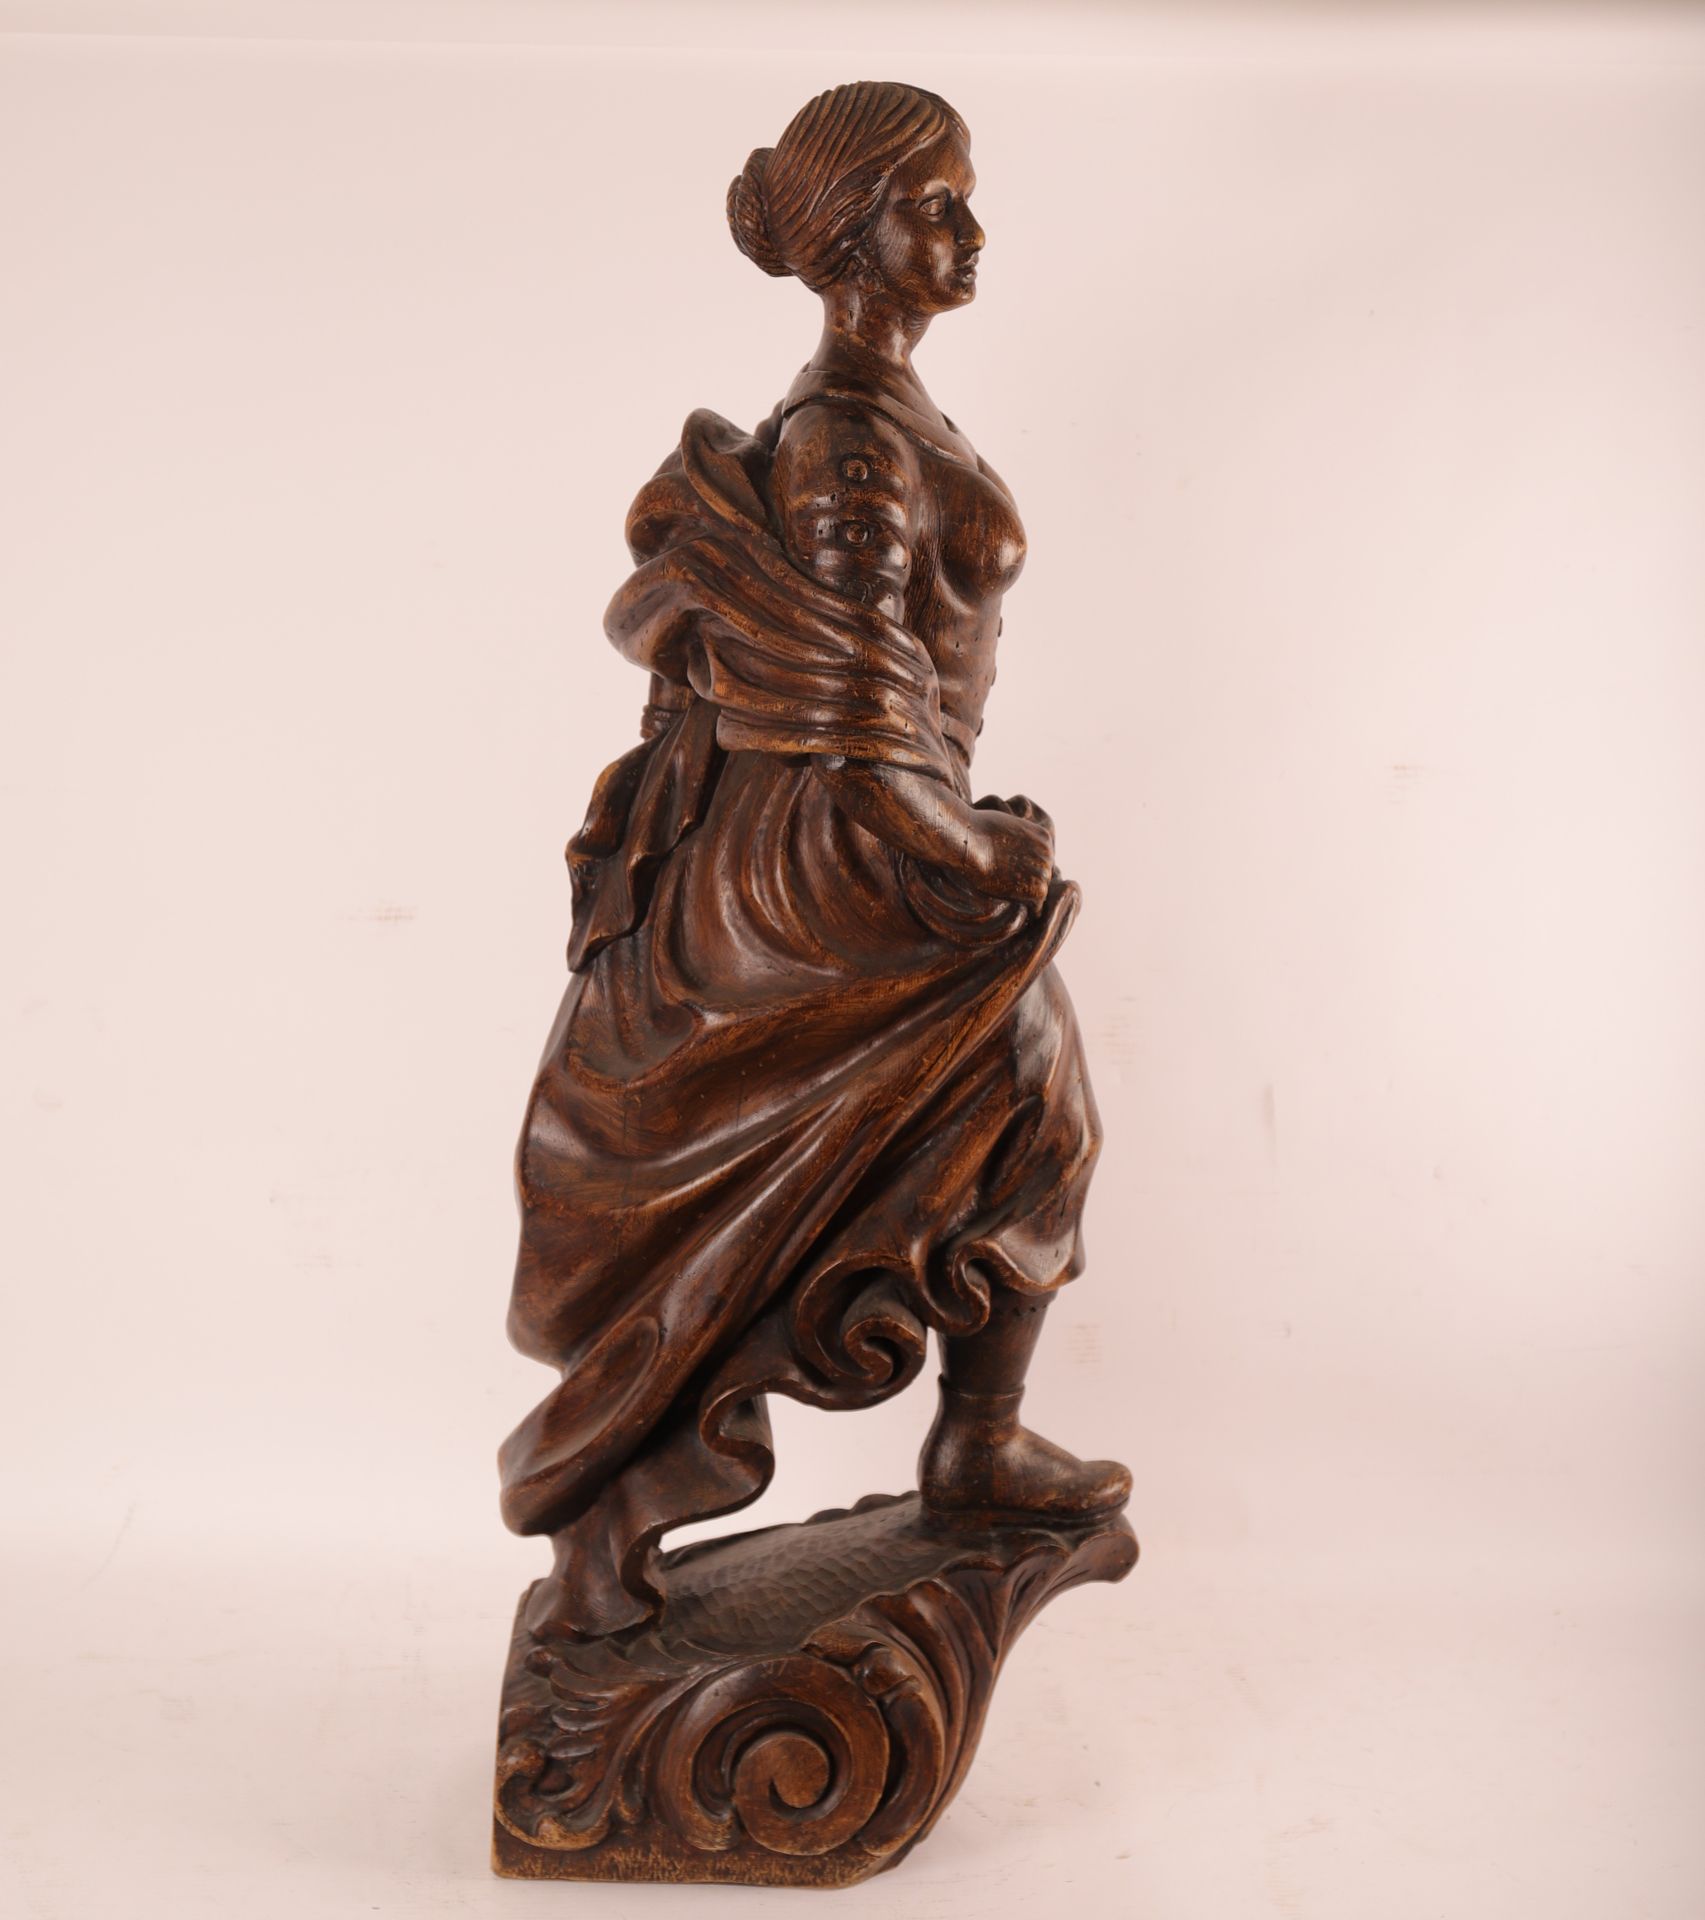 Null FIGUREHEAD OF SHIP IN CARVED WOOD

Representing a woman in a drape standing&hellip;